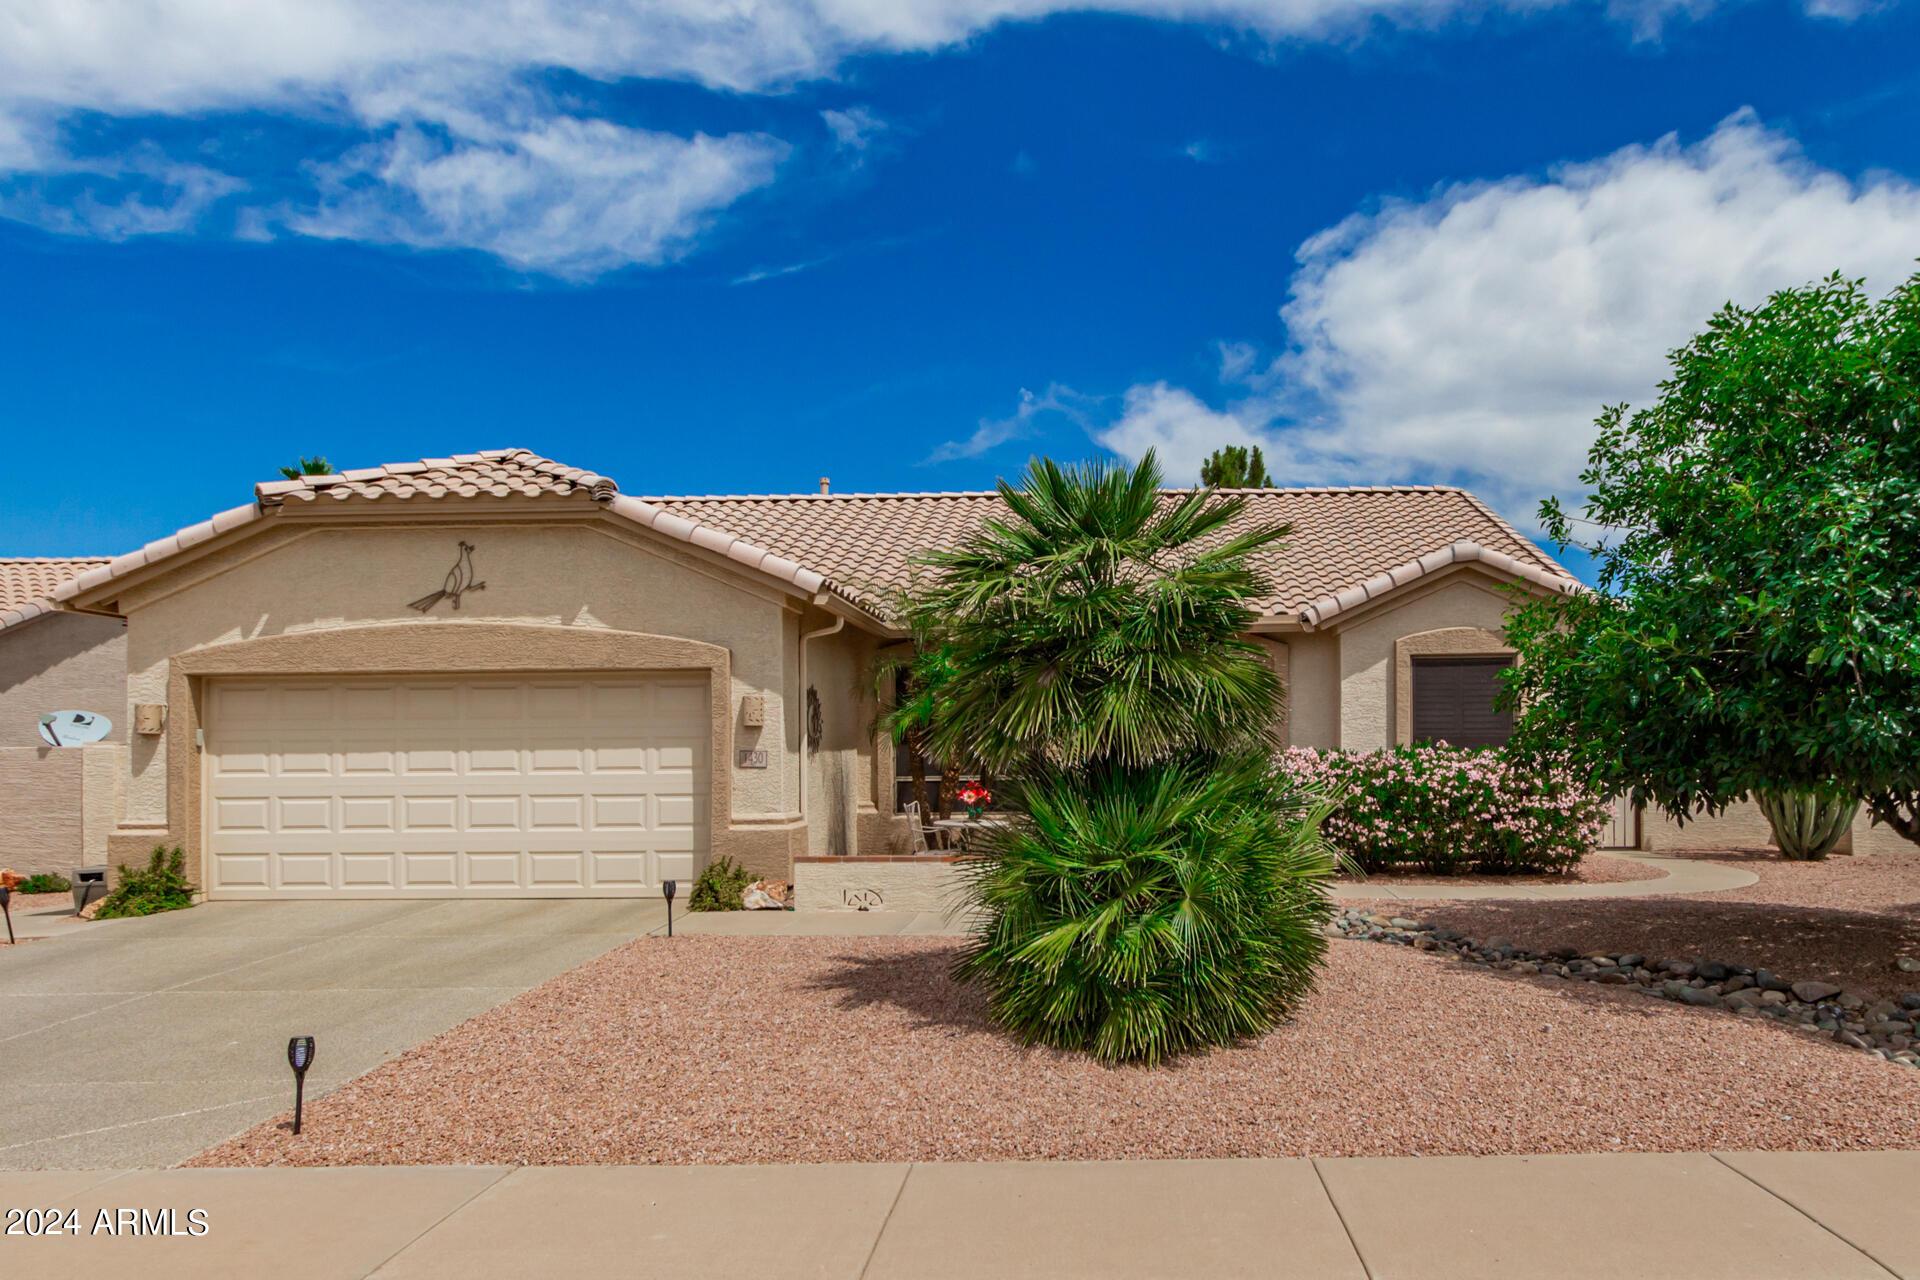 Photo one of 1430 E Winged Foot Dr Chandler AZ 85249 | MLS 6696416